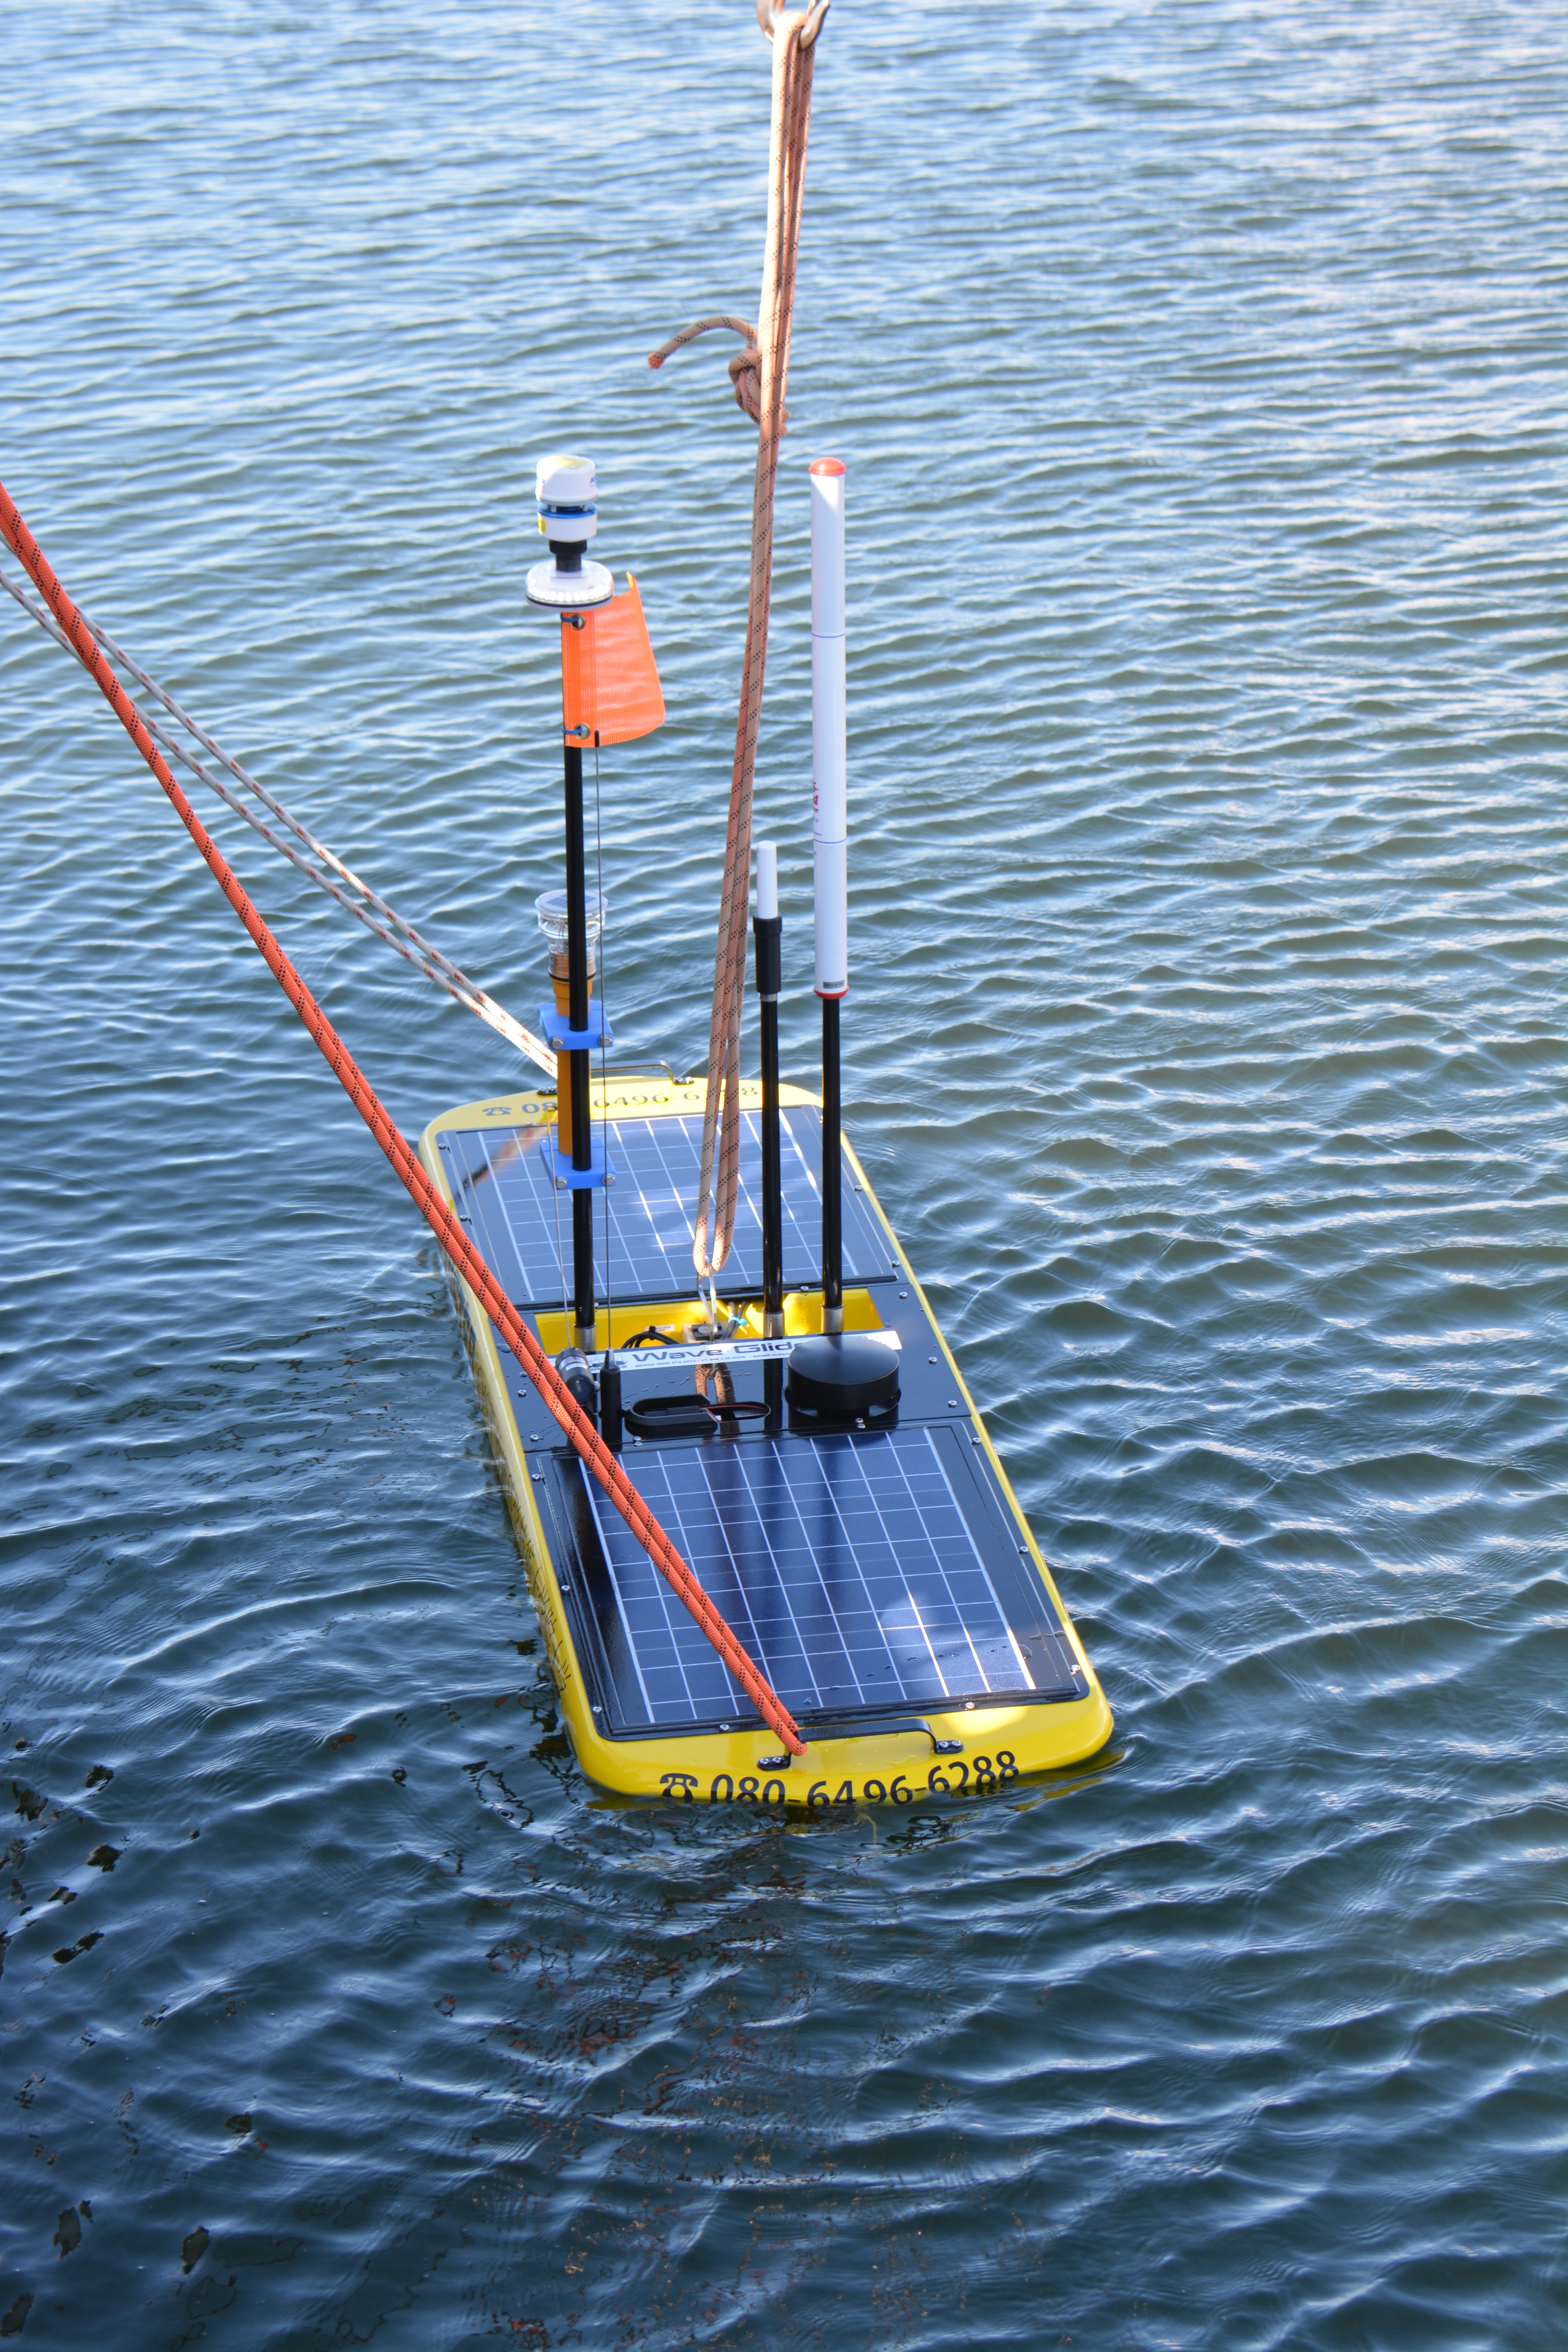 The Wave Glider Floats on the Ocean Surface